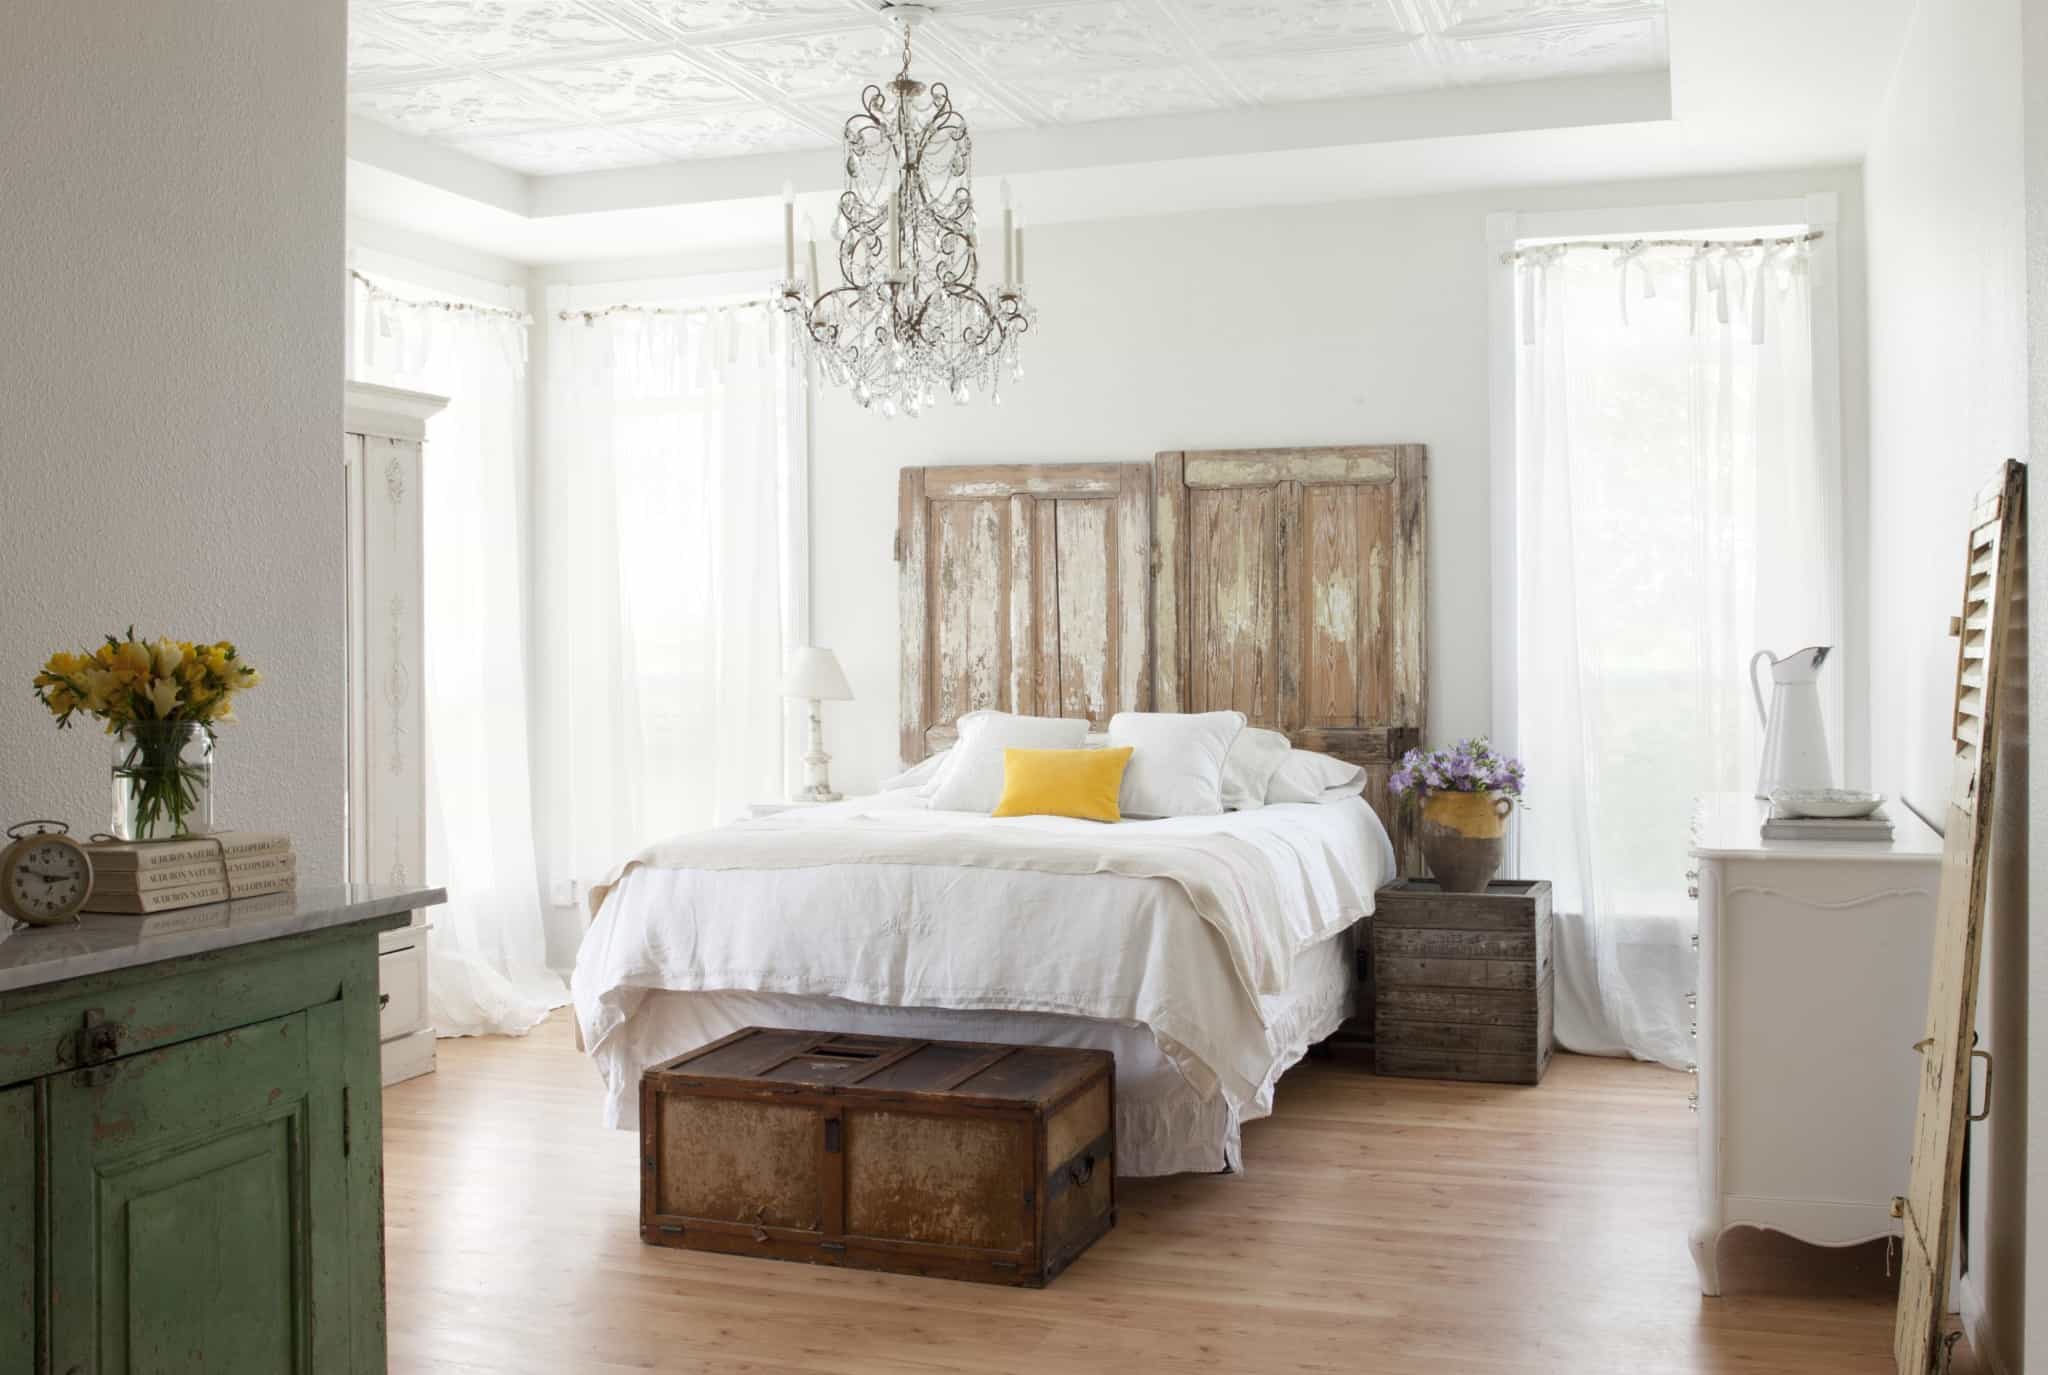 Incorporate other wood faded furniture pieces around the room to complete the rustic look.